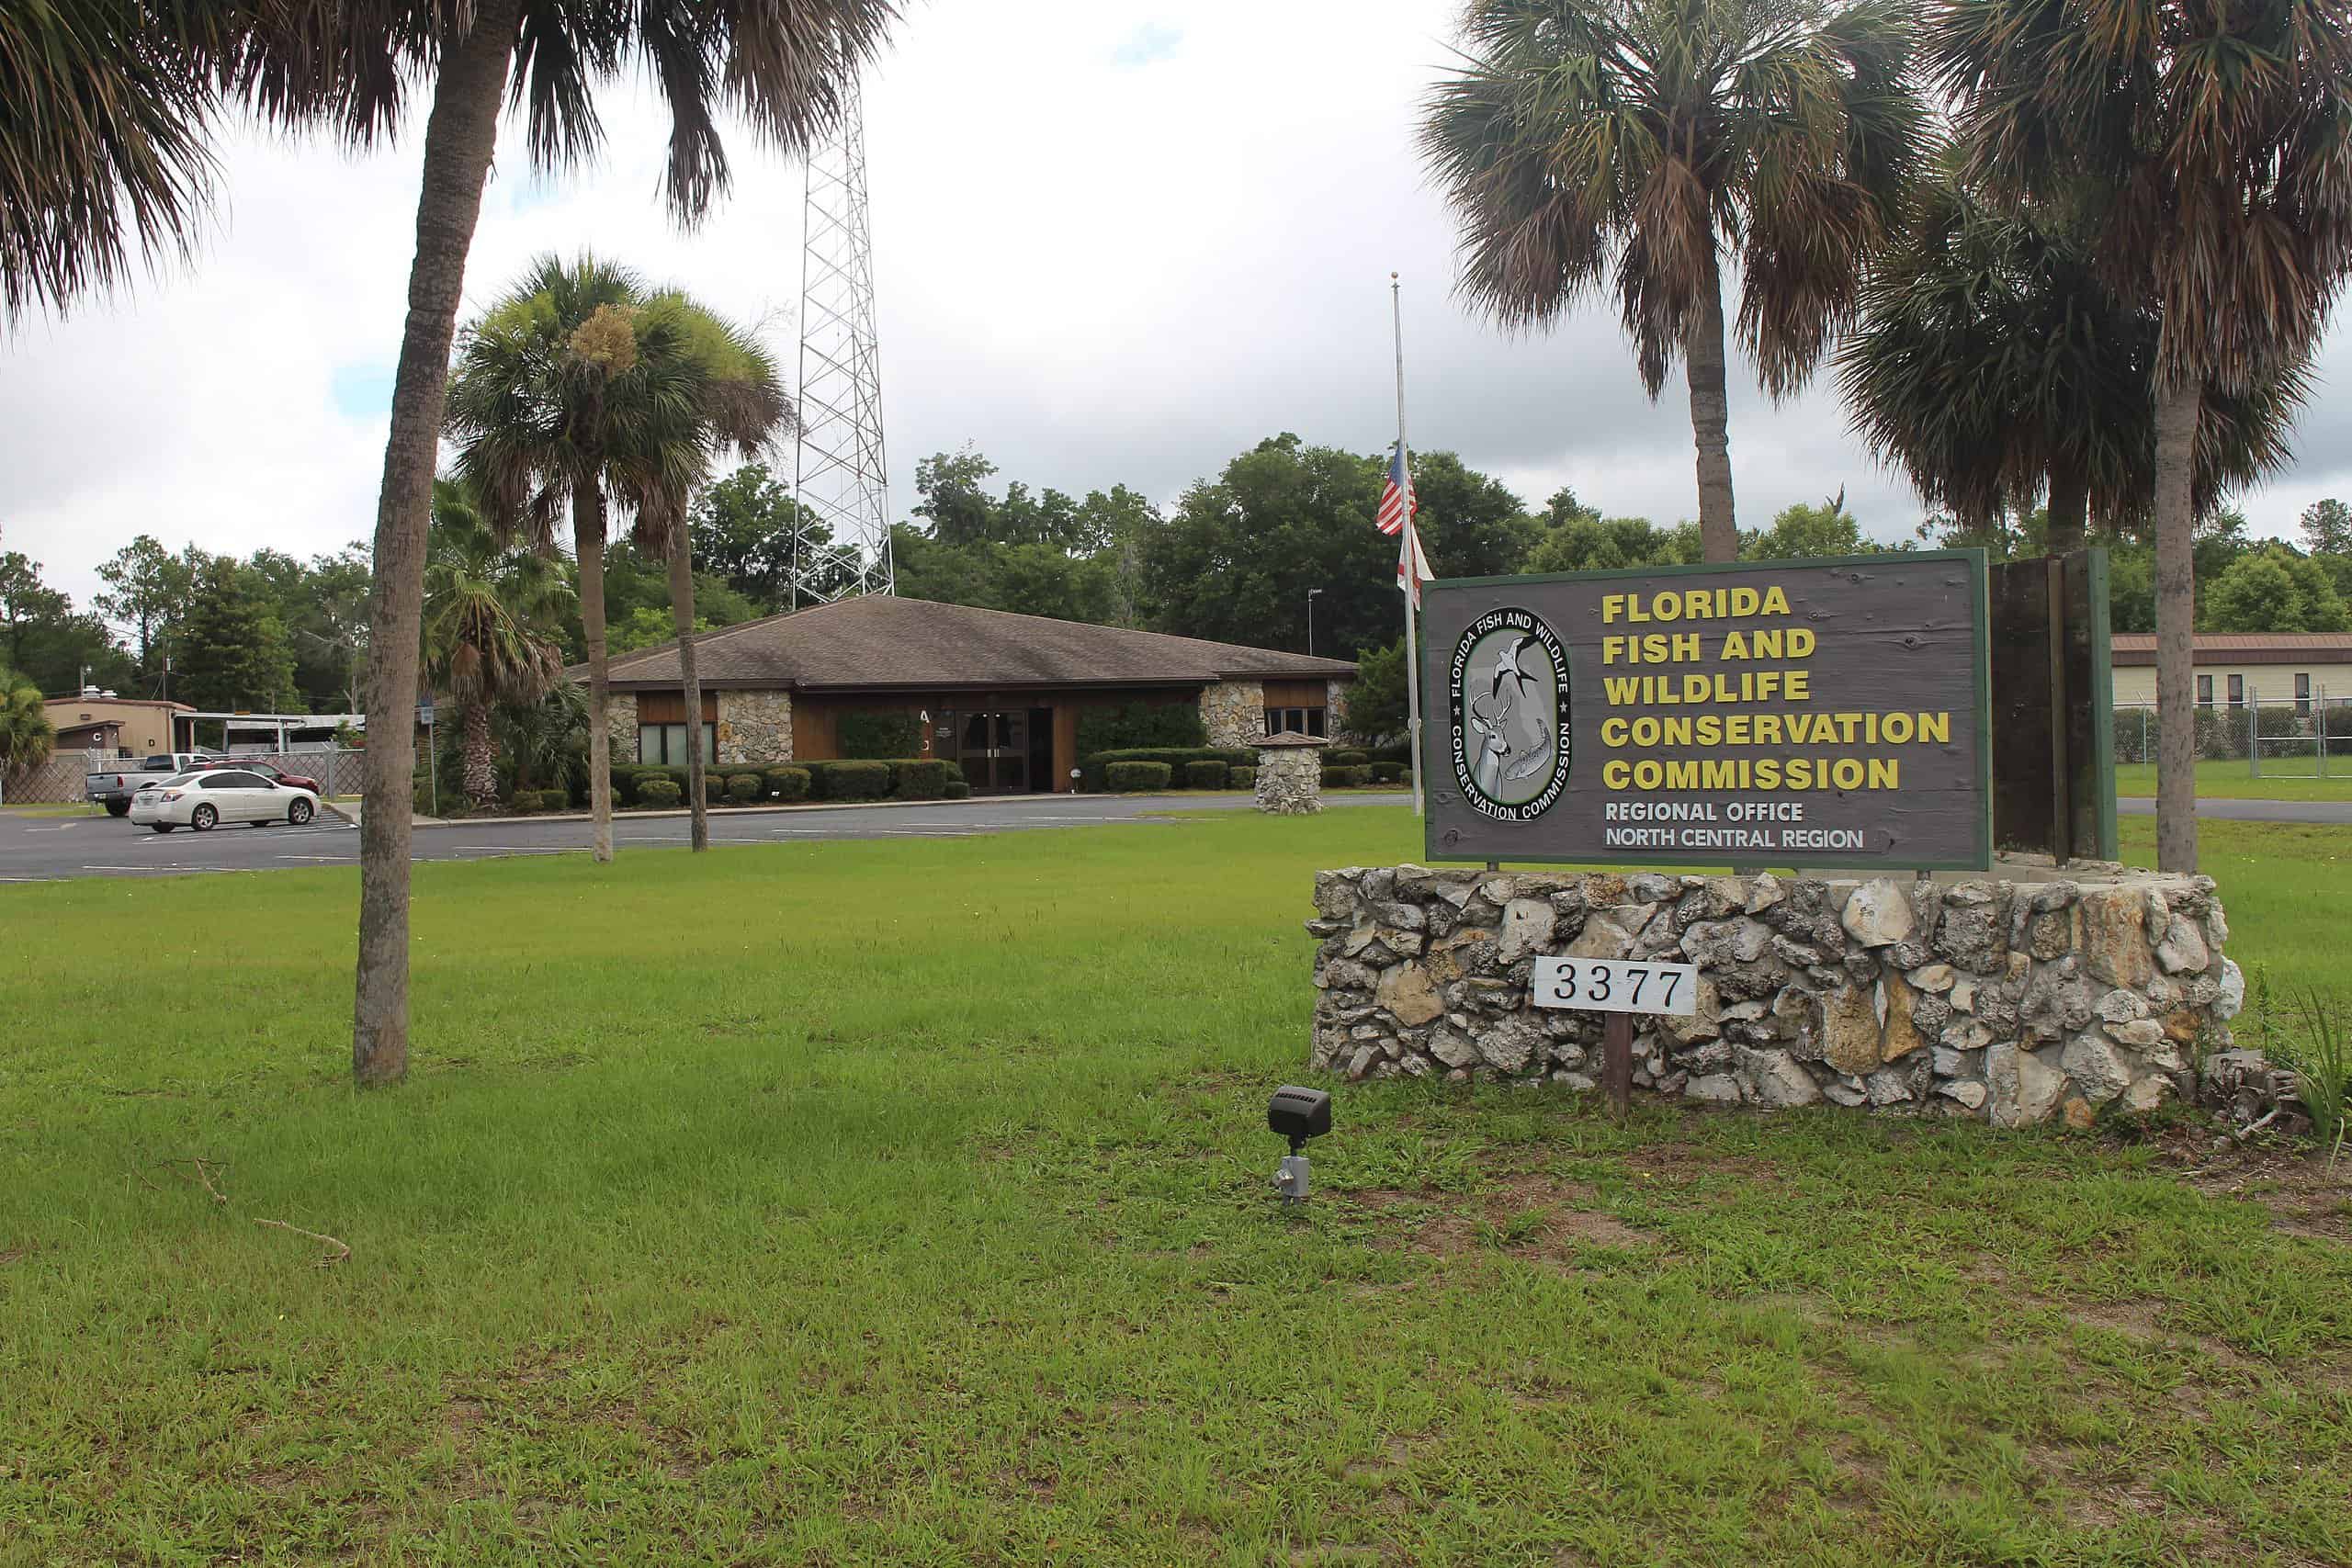 Florida Fish and Wildlife Conservation Commission, Regional Office North Central Region by Michael Rivera